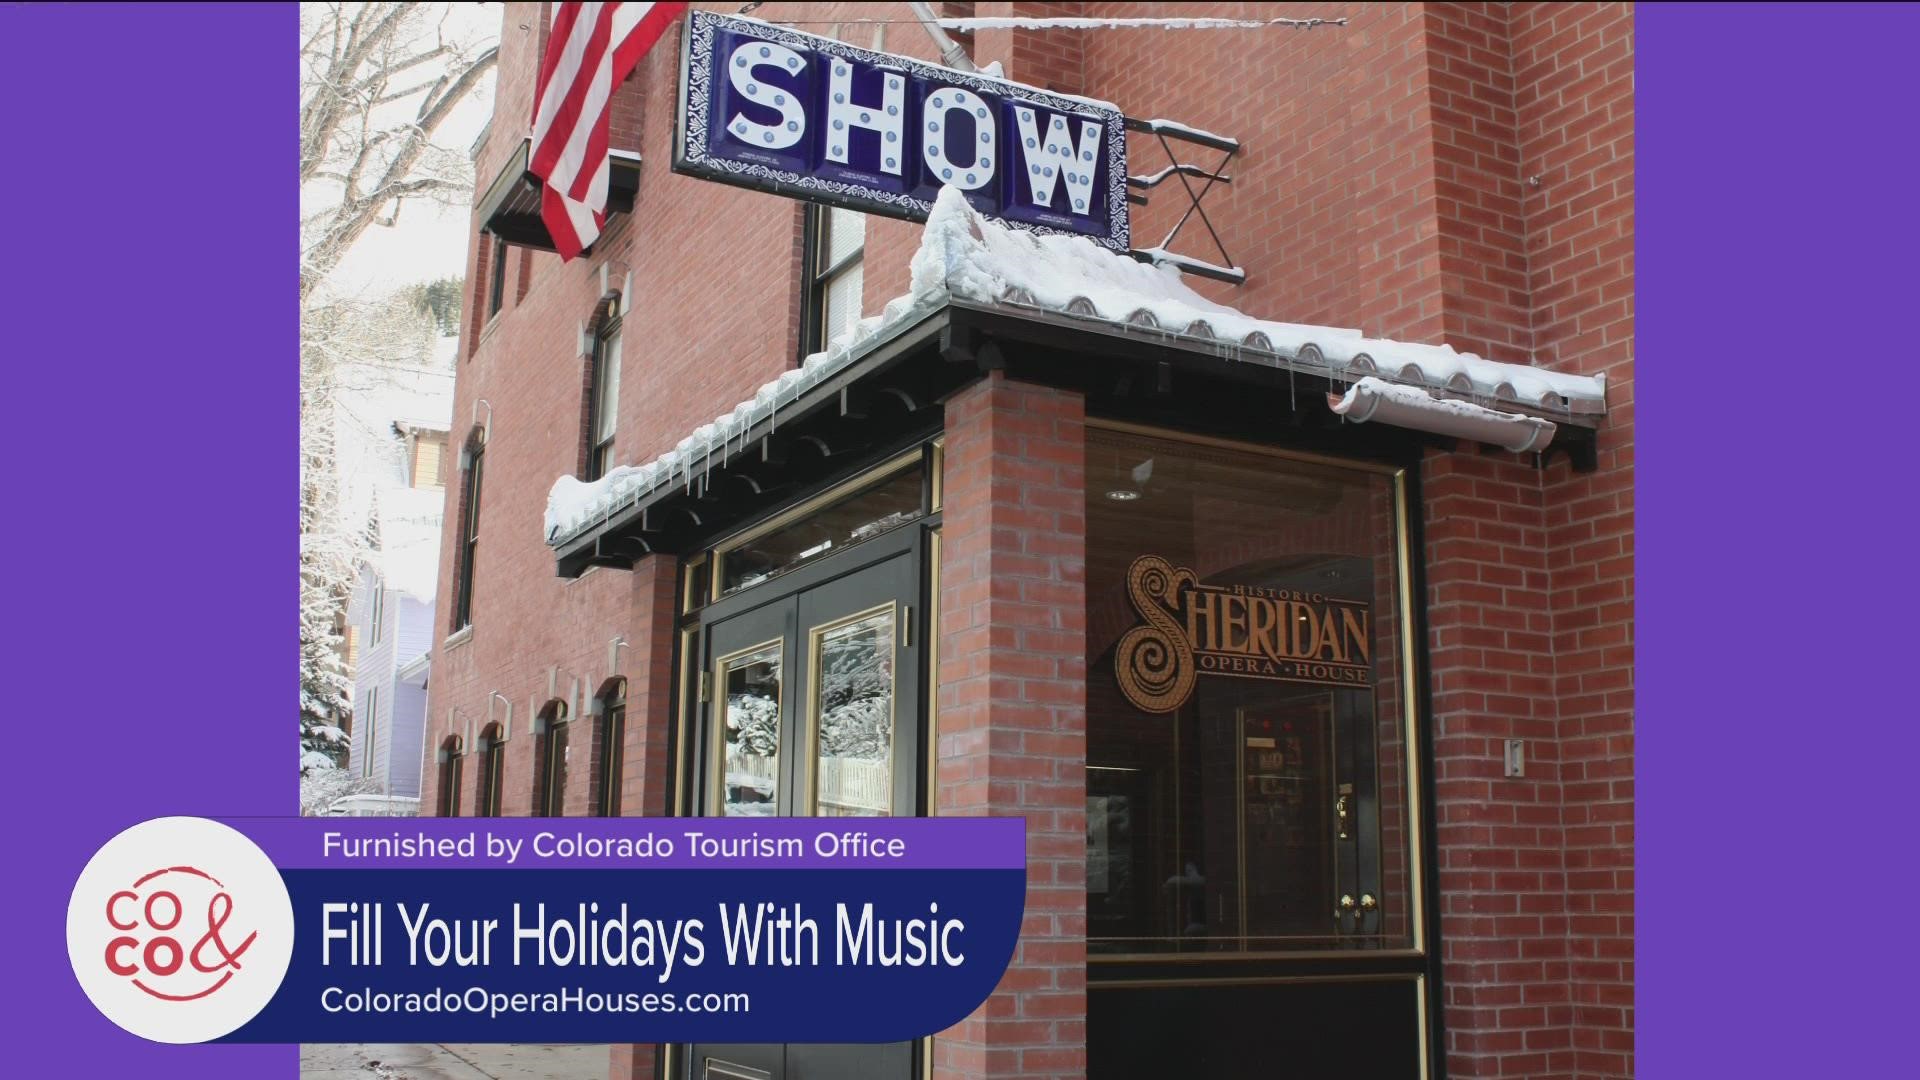 Do something different this holiday season and take in the sights and sounds of Colorado's grand opera houses. Learn more by visiting ColoradoOperaHouses.com.